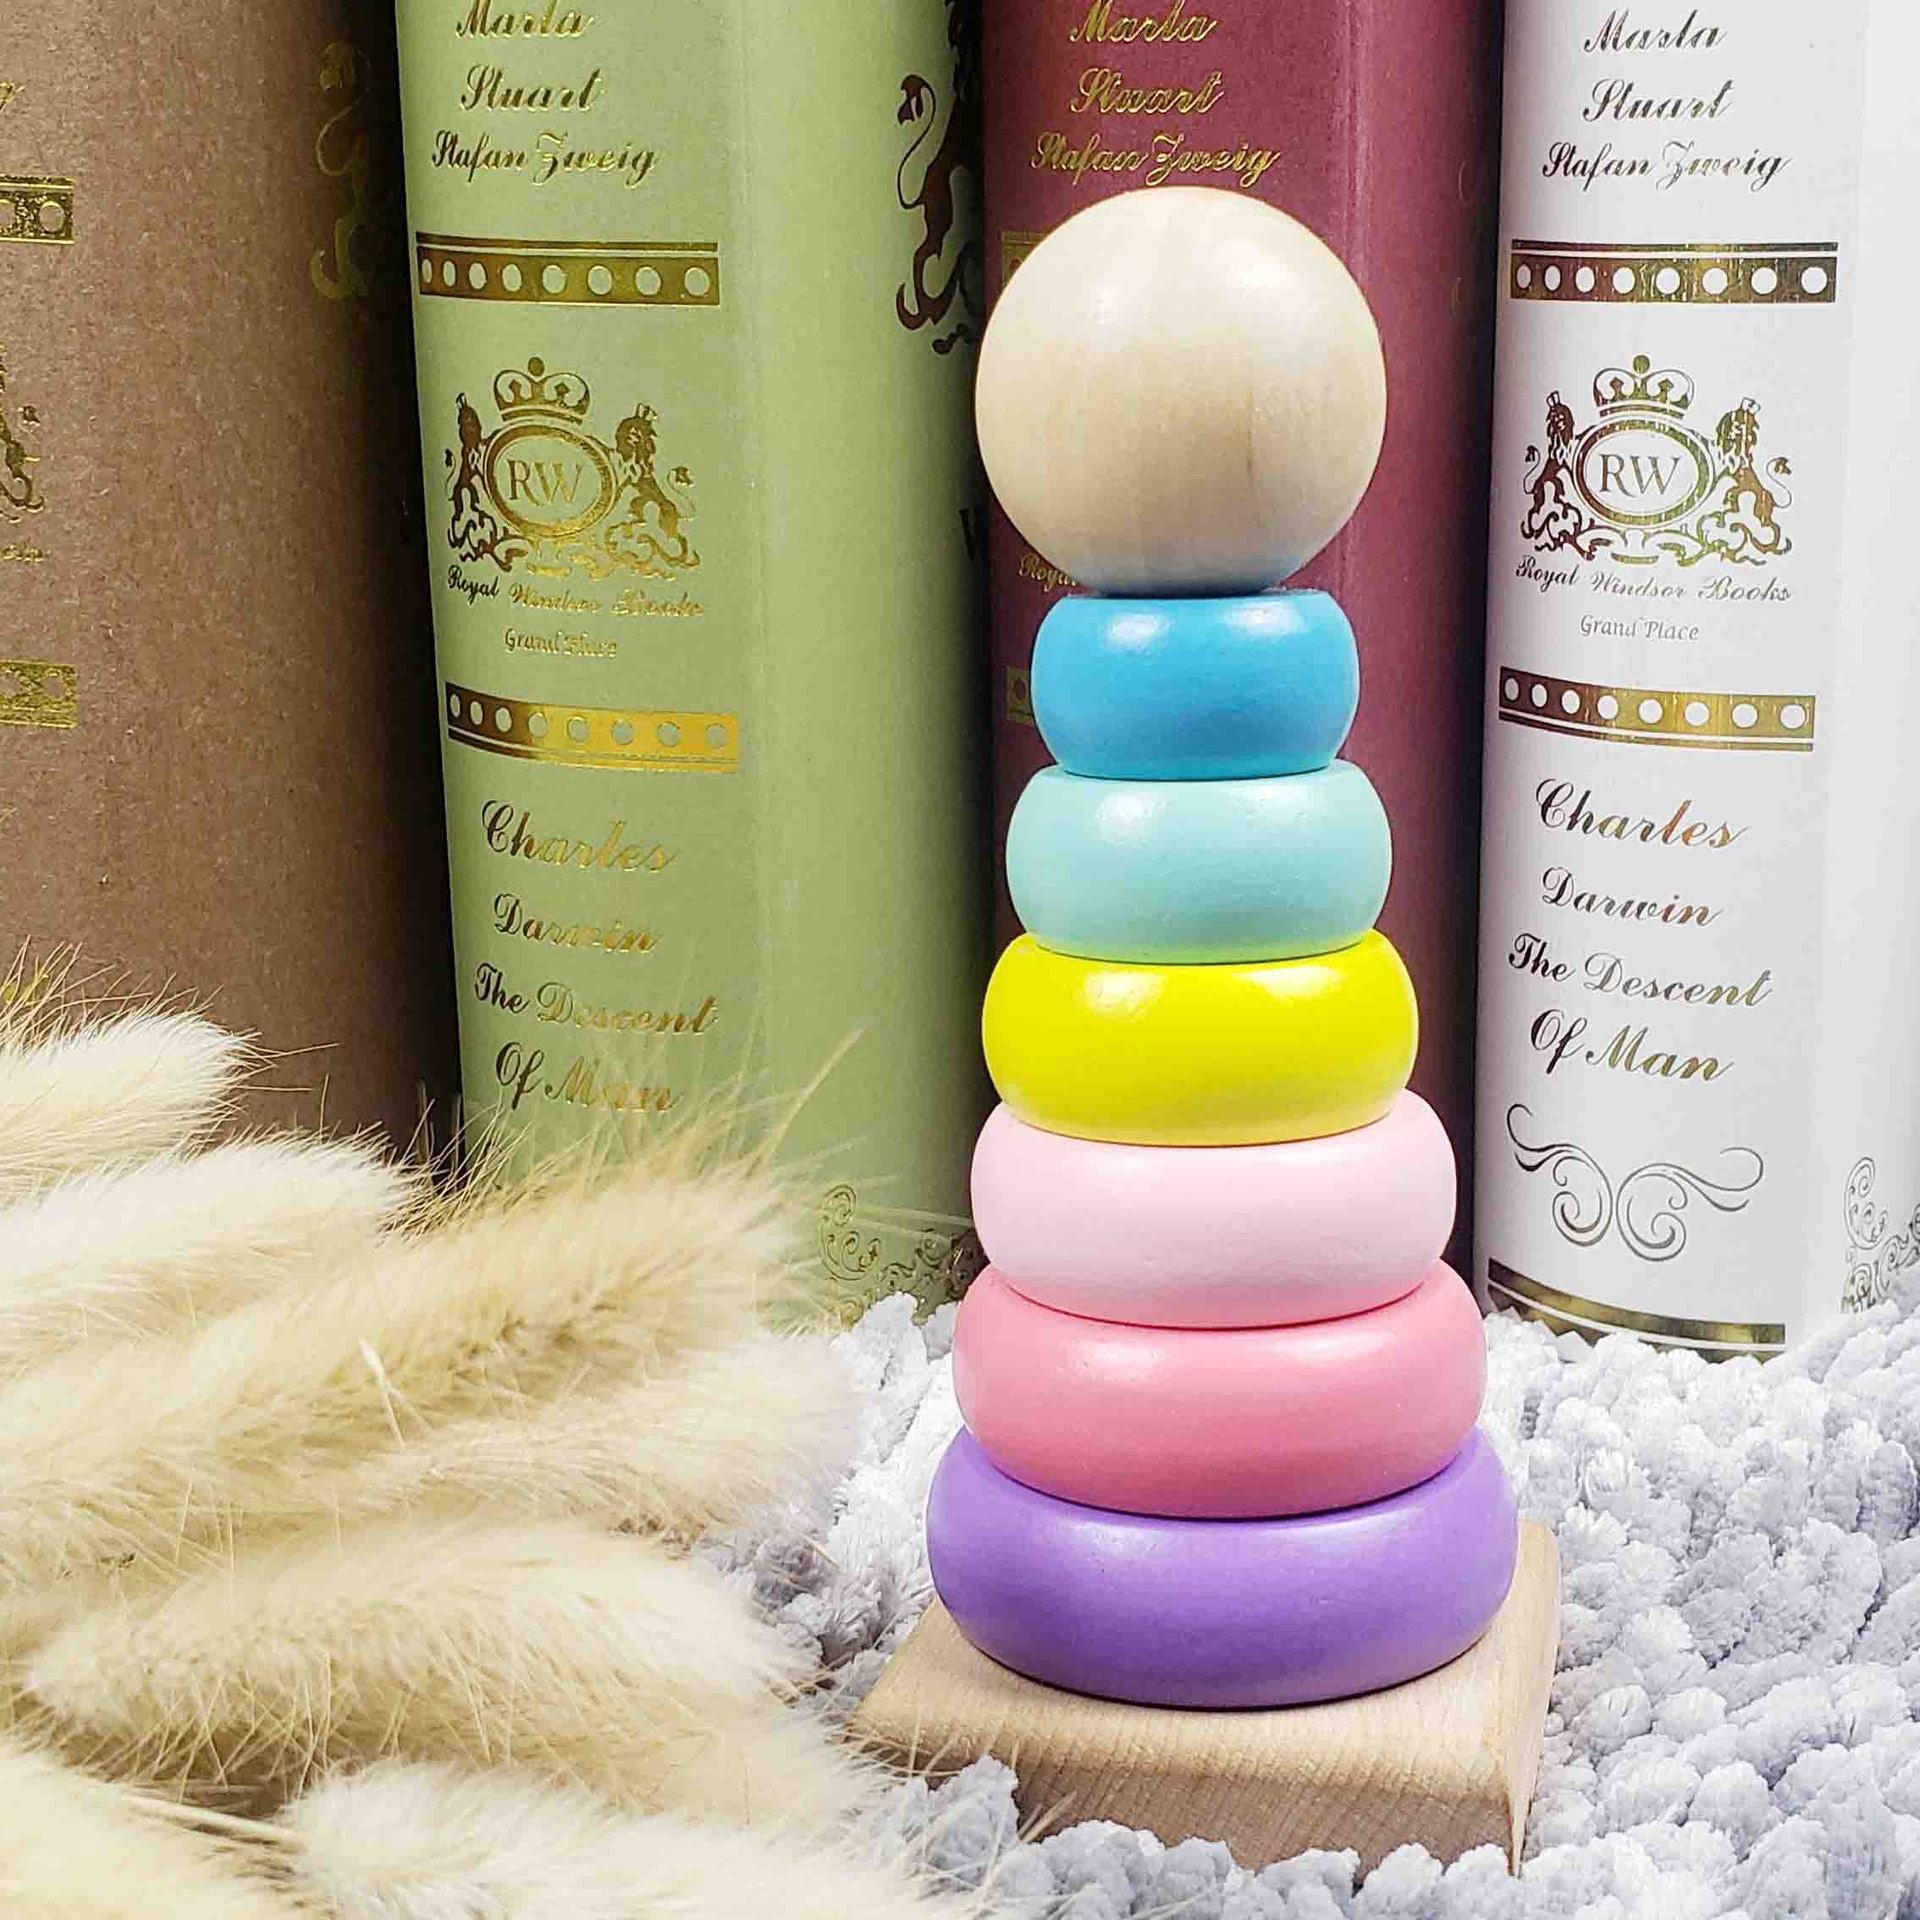 Rainbow Stacking Ring Tower Toys - Huggies Baby